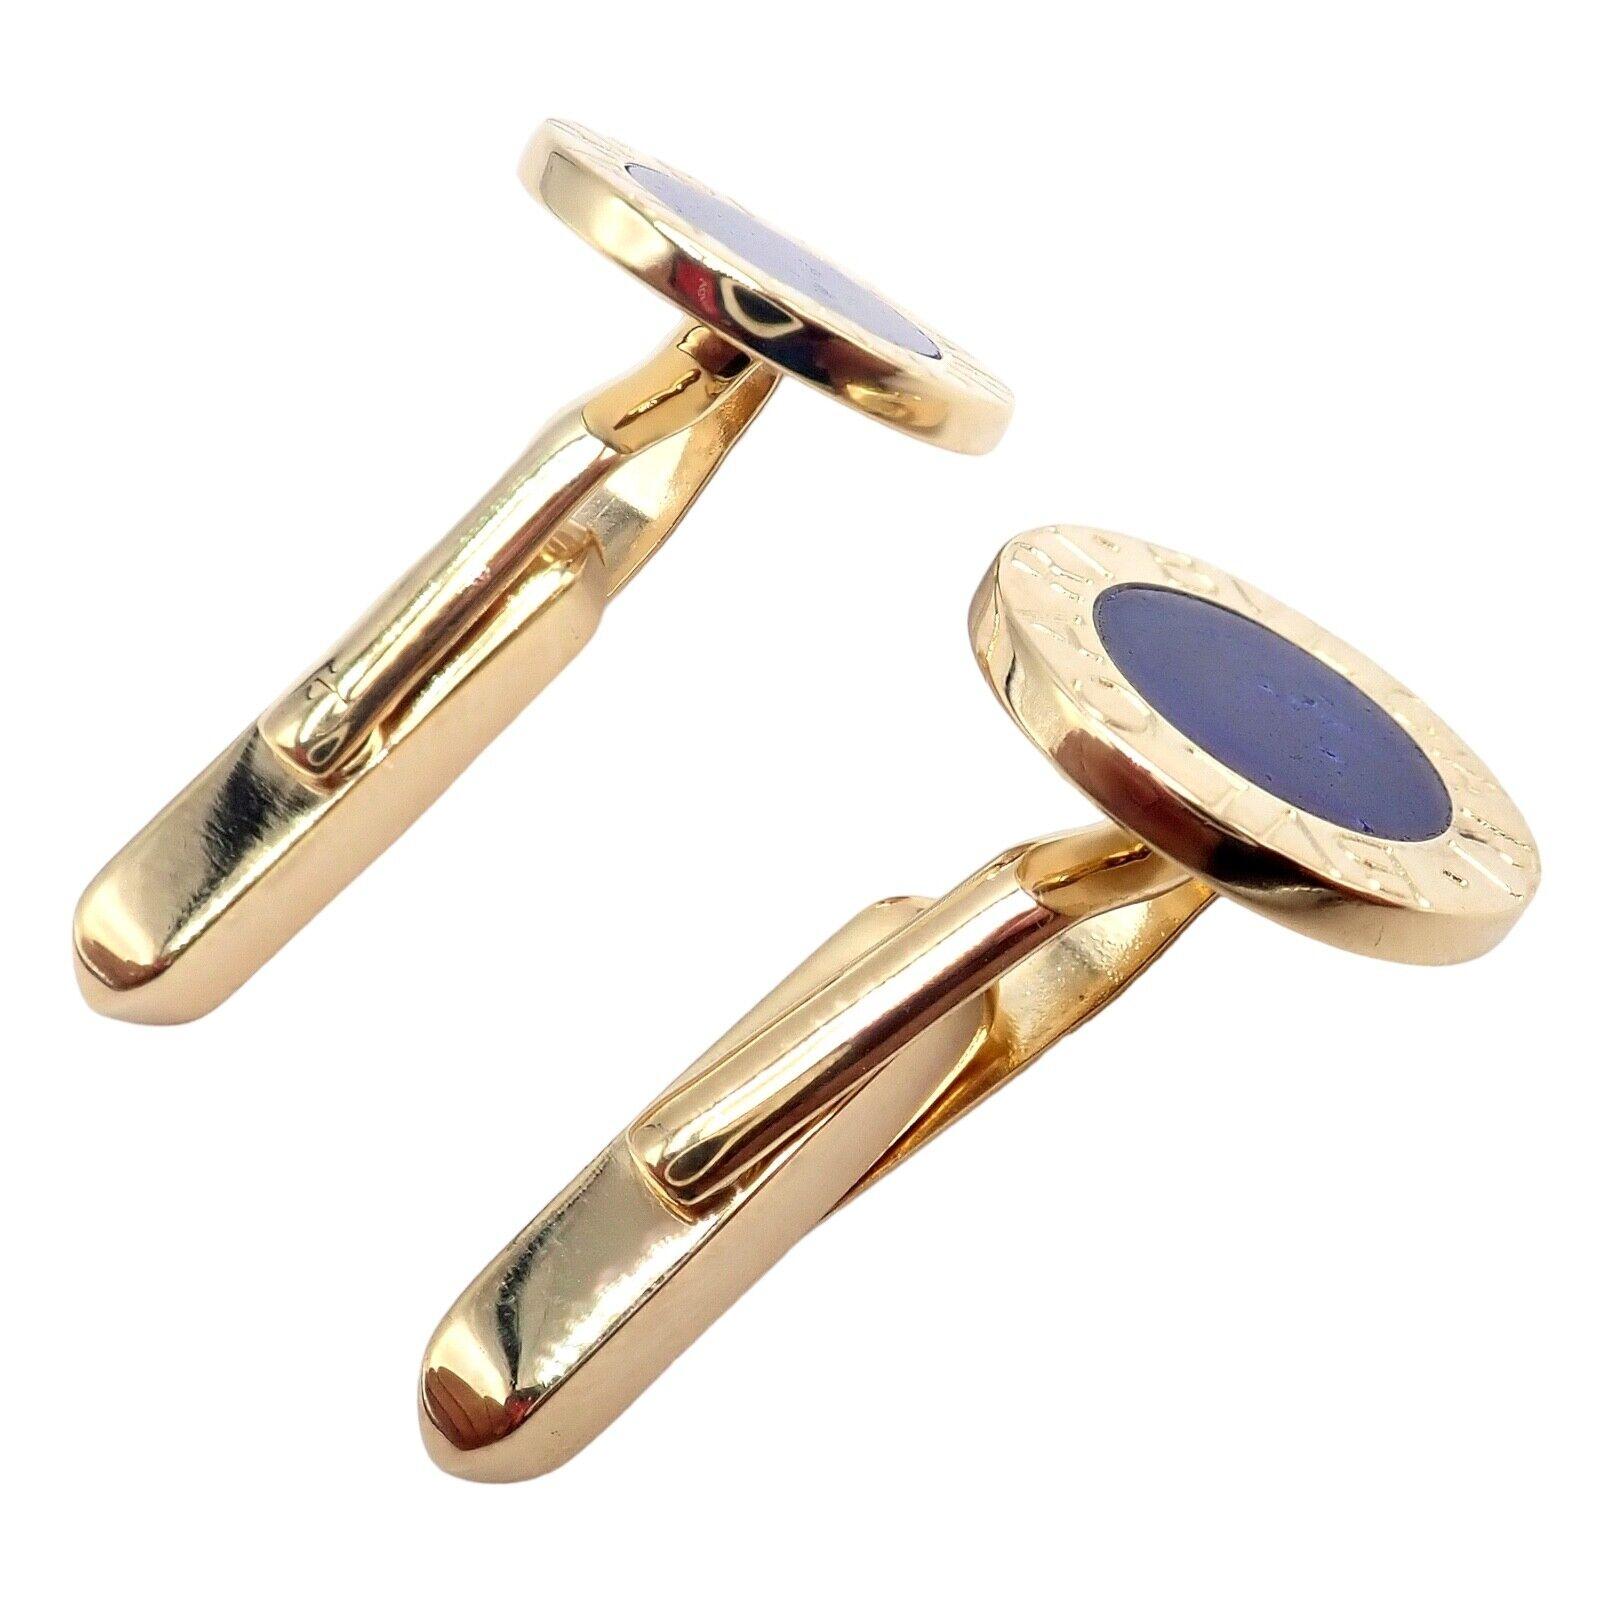 The Authentic Bvlgari Bulgari 18k Yellow Gold Lapis Lazuli Cufflinks are a striking accessory that exudes luxury. Made from 18k yellow gold, these cufflinks feature exquisite lapis lazuli stones. The deep blue hue of the lapis lazuli contrasts